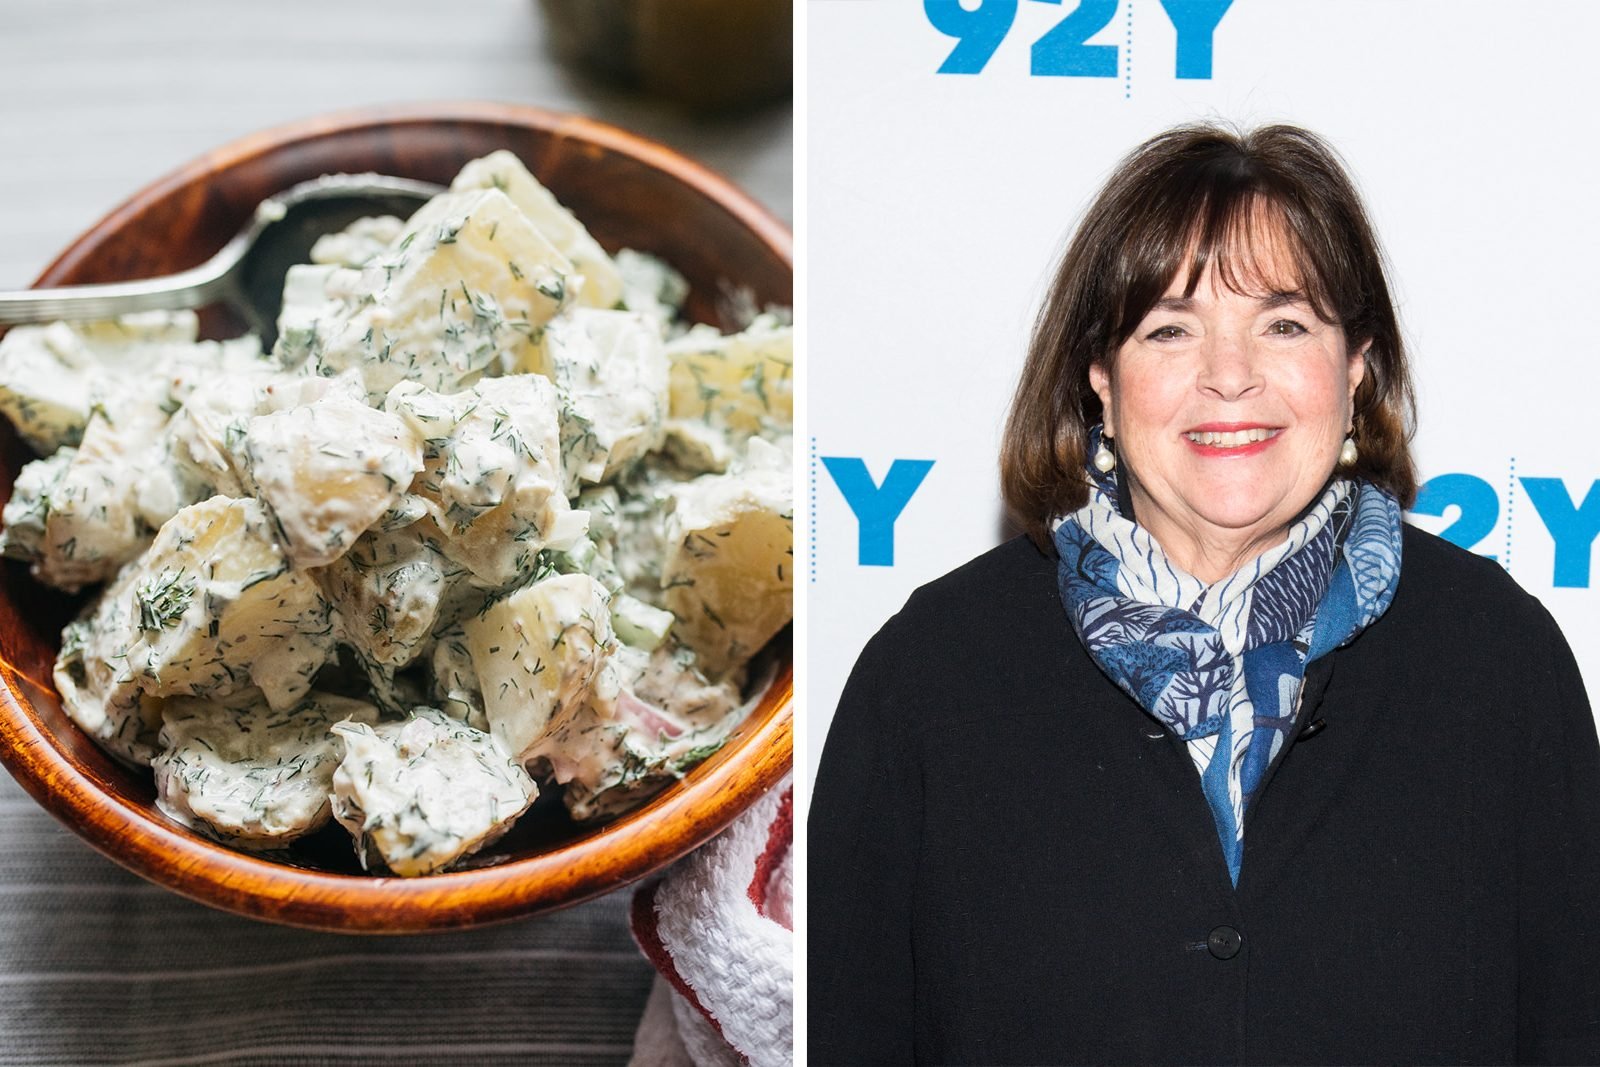   
																We Made the Ina Garten Potato Salad Recipe, and It's Perfect for Sharing 
															 